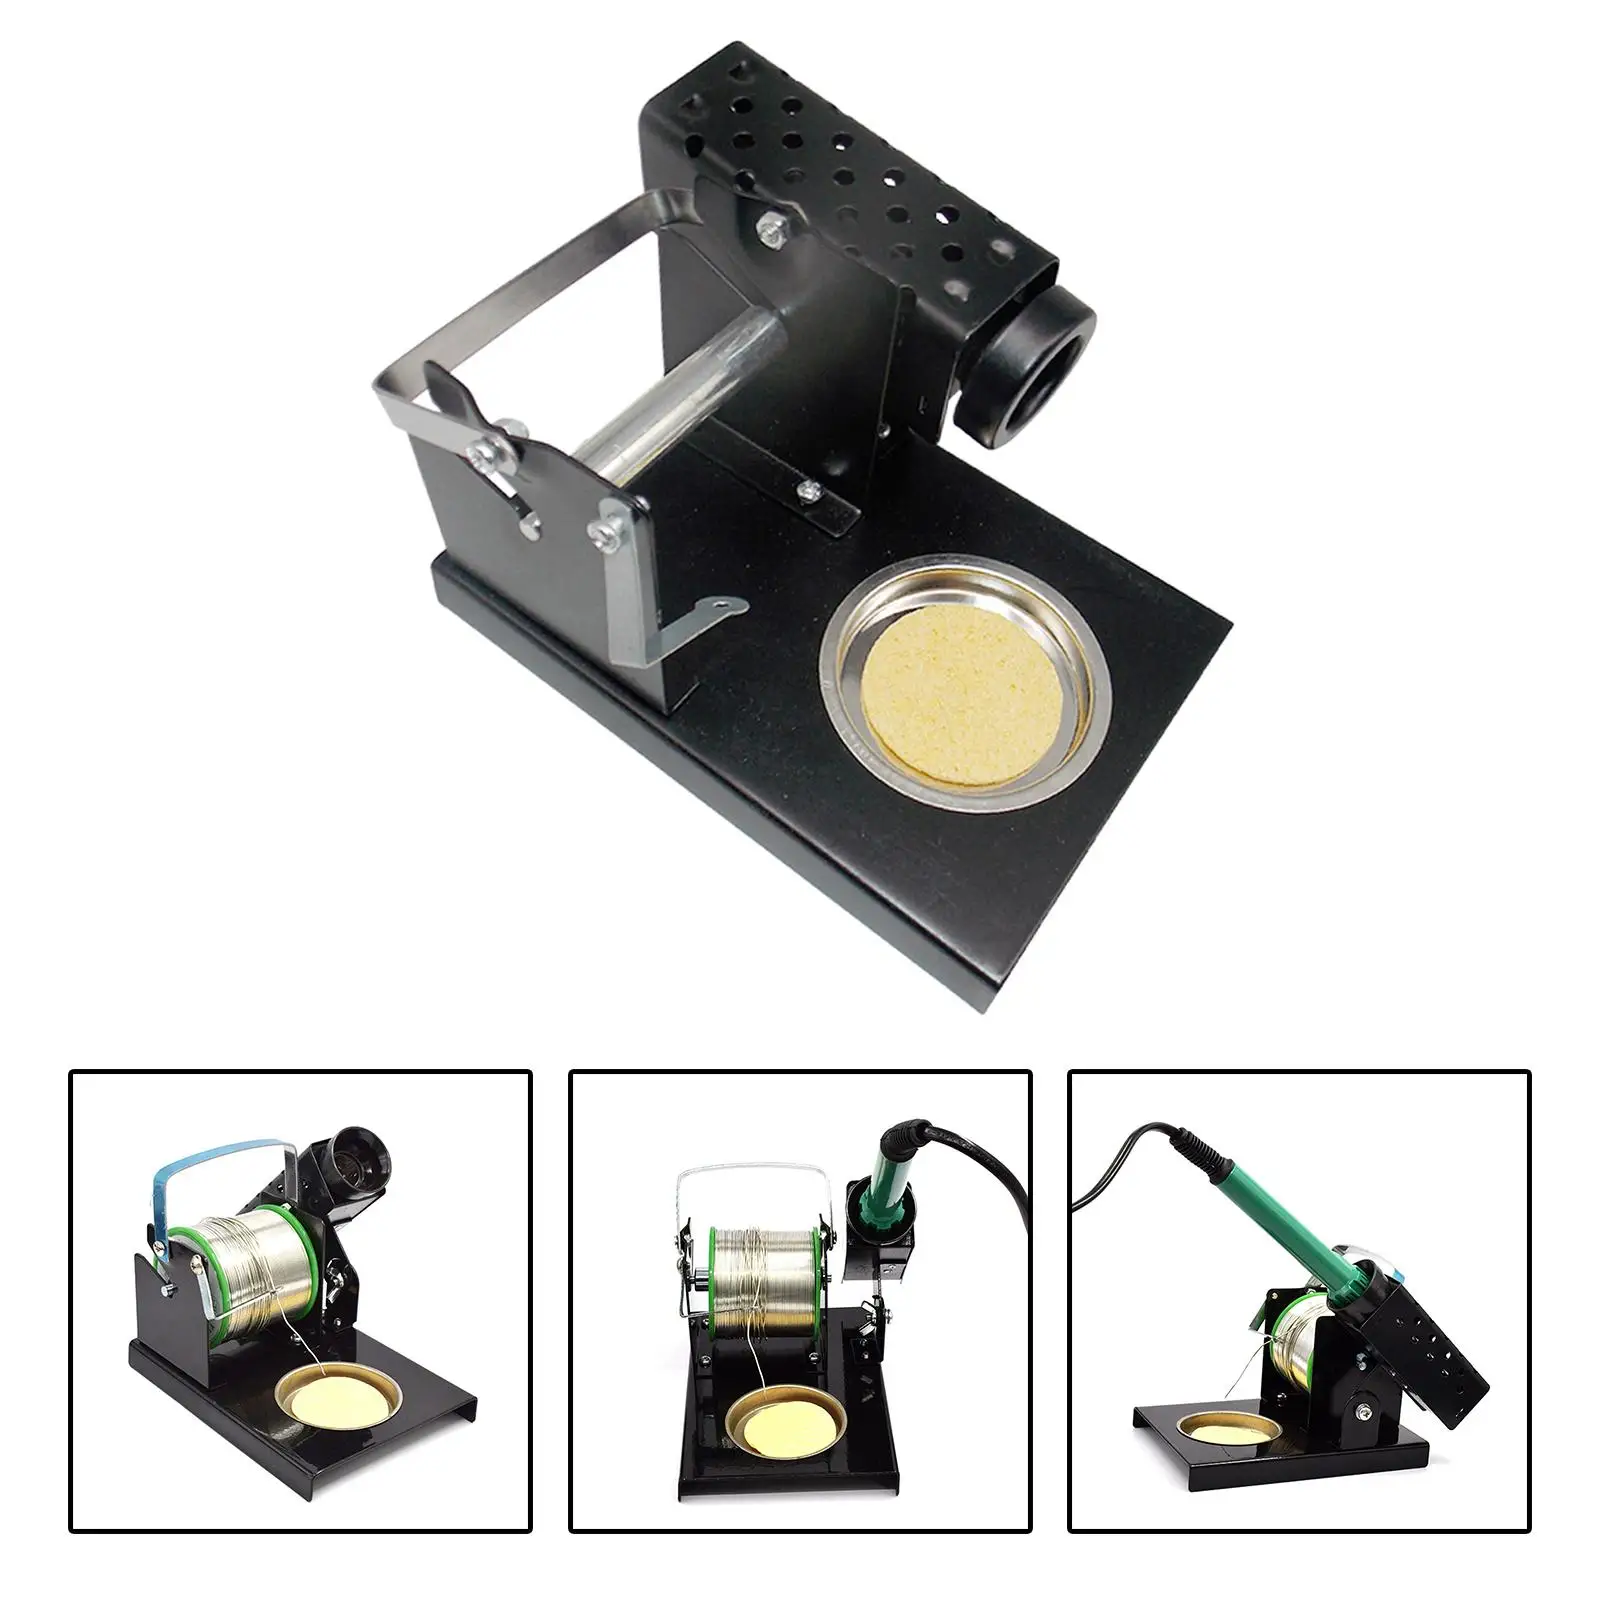 Heavy Duty Heat Resistant Soldering Iron Holder with Tip Cleaning Sponge Welding Accessories High Temperature Resistance